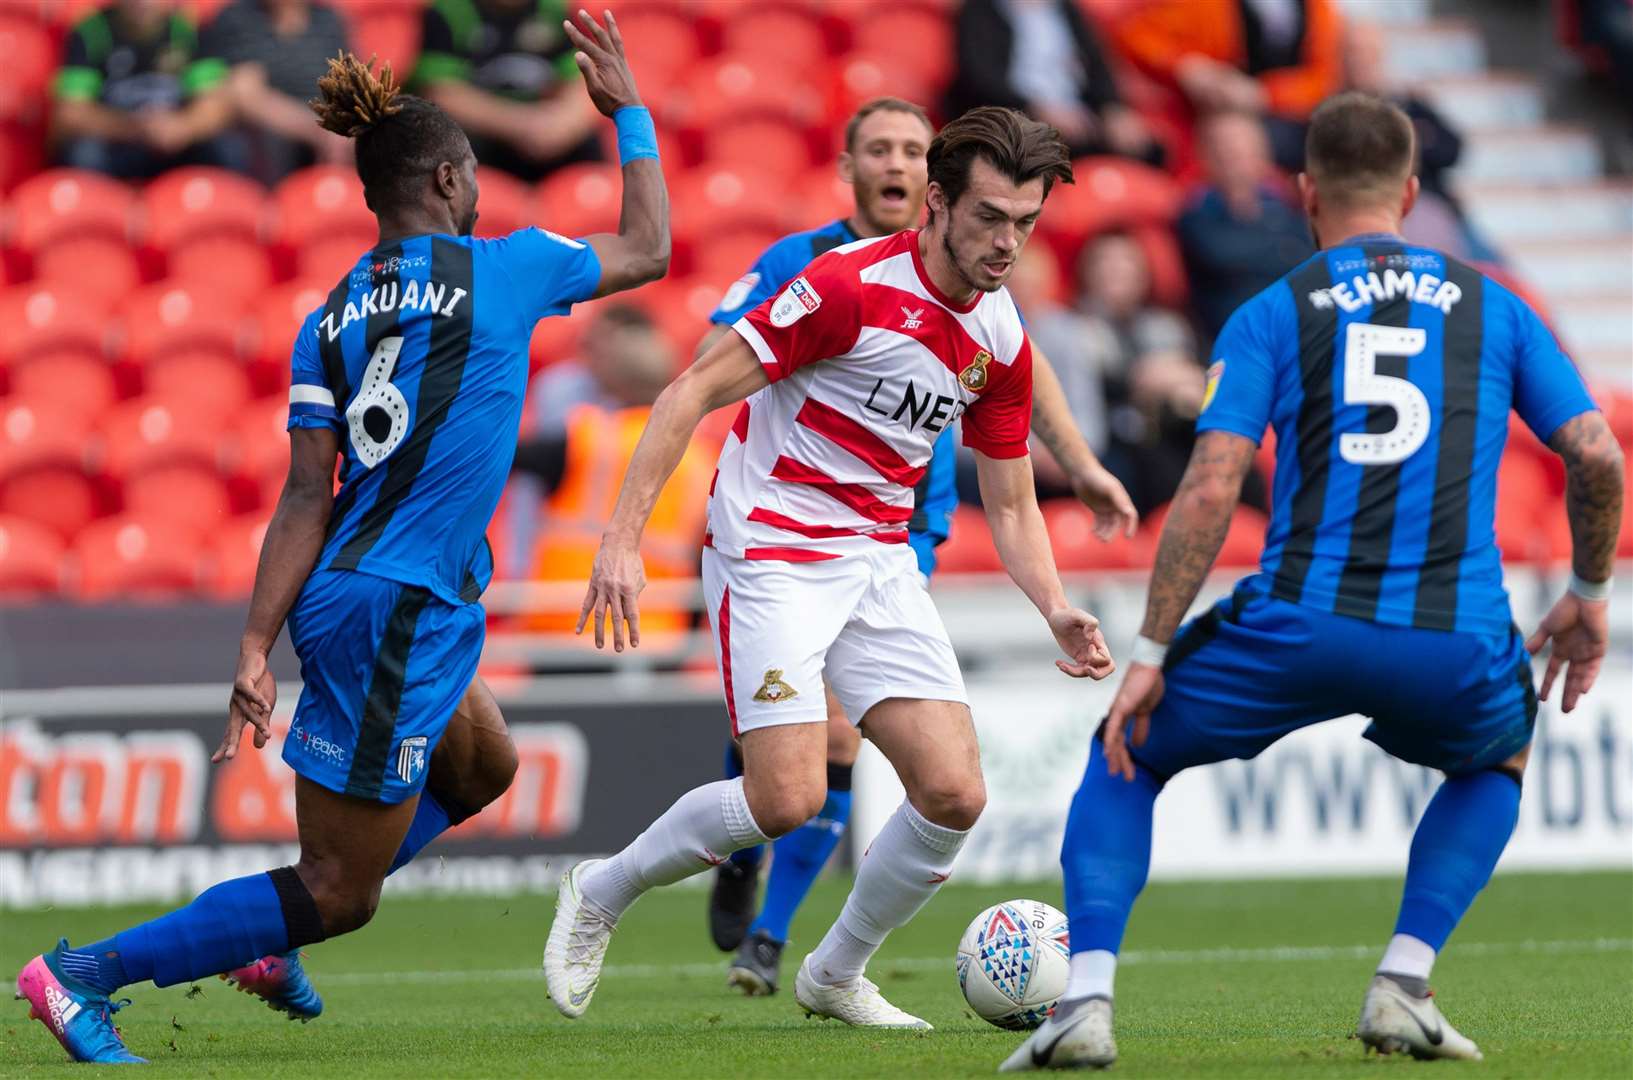 Former Gills forward John Marquis takes on the visiting defence. Picture: Ady Kerry